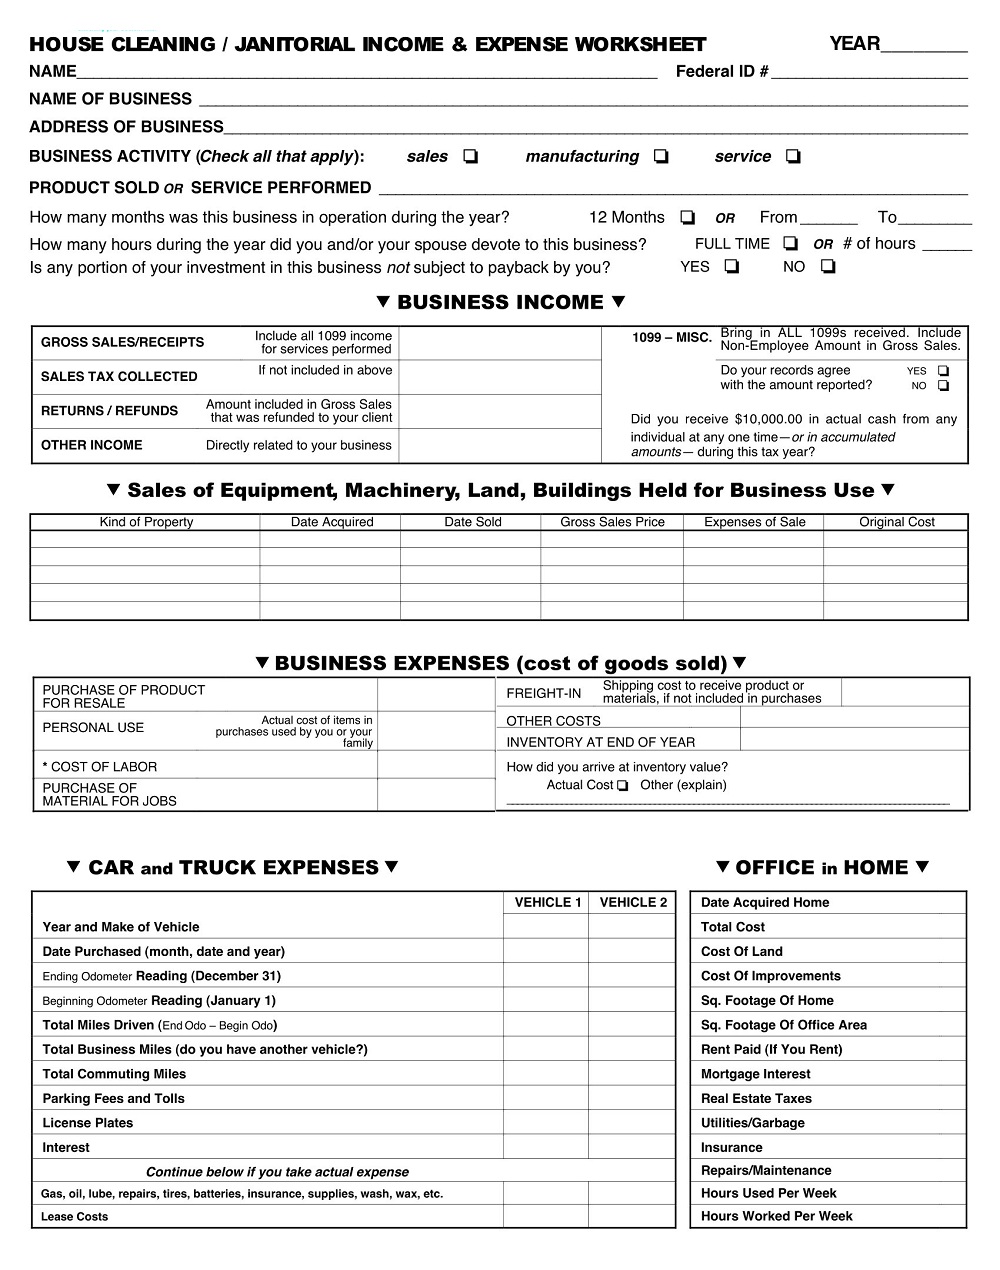 Janitorial Income & Expense Worksheet